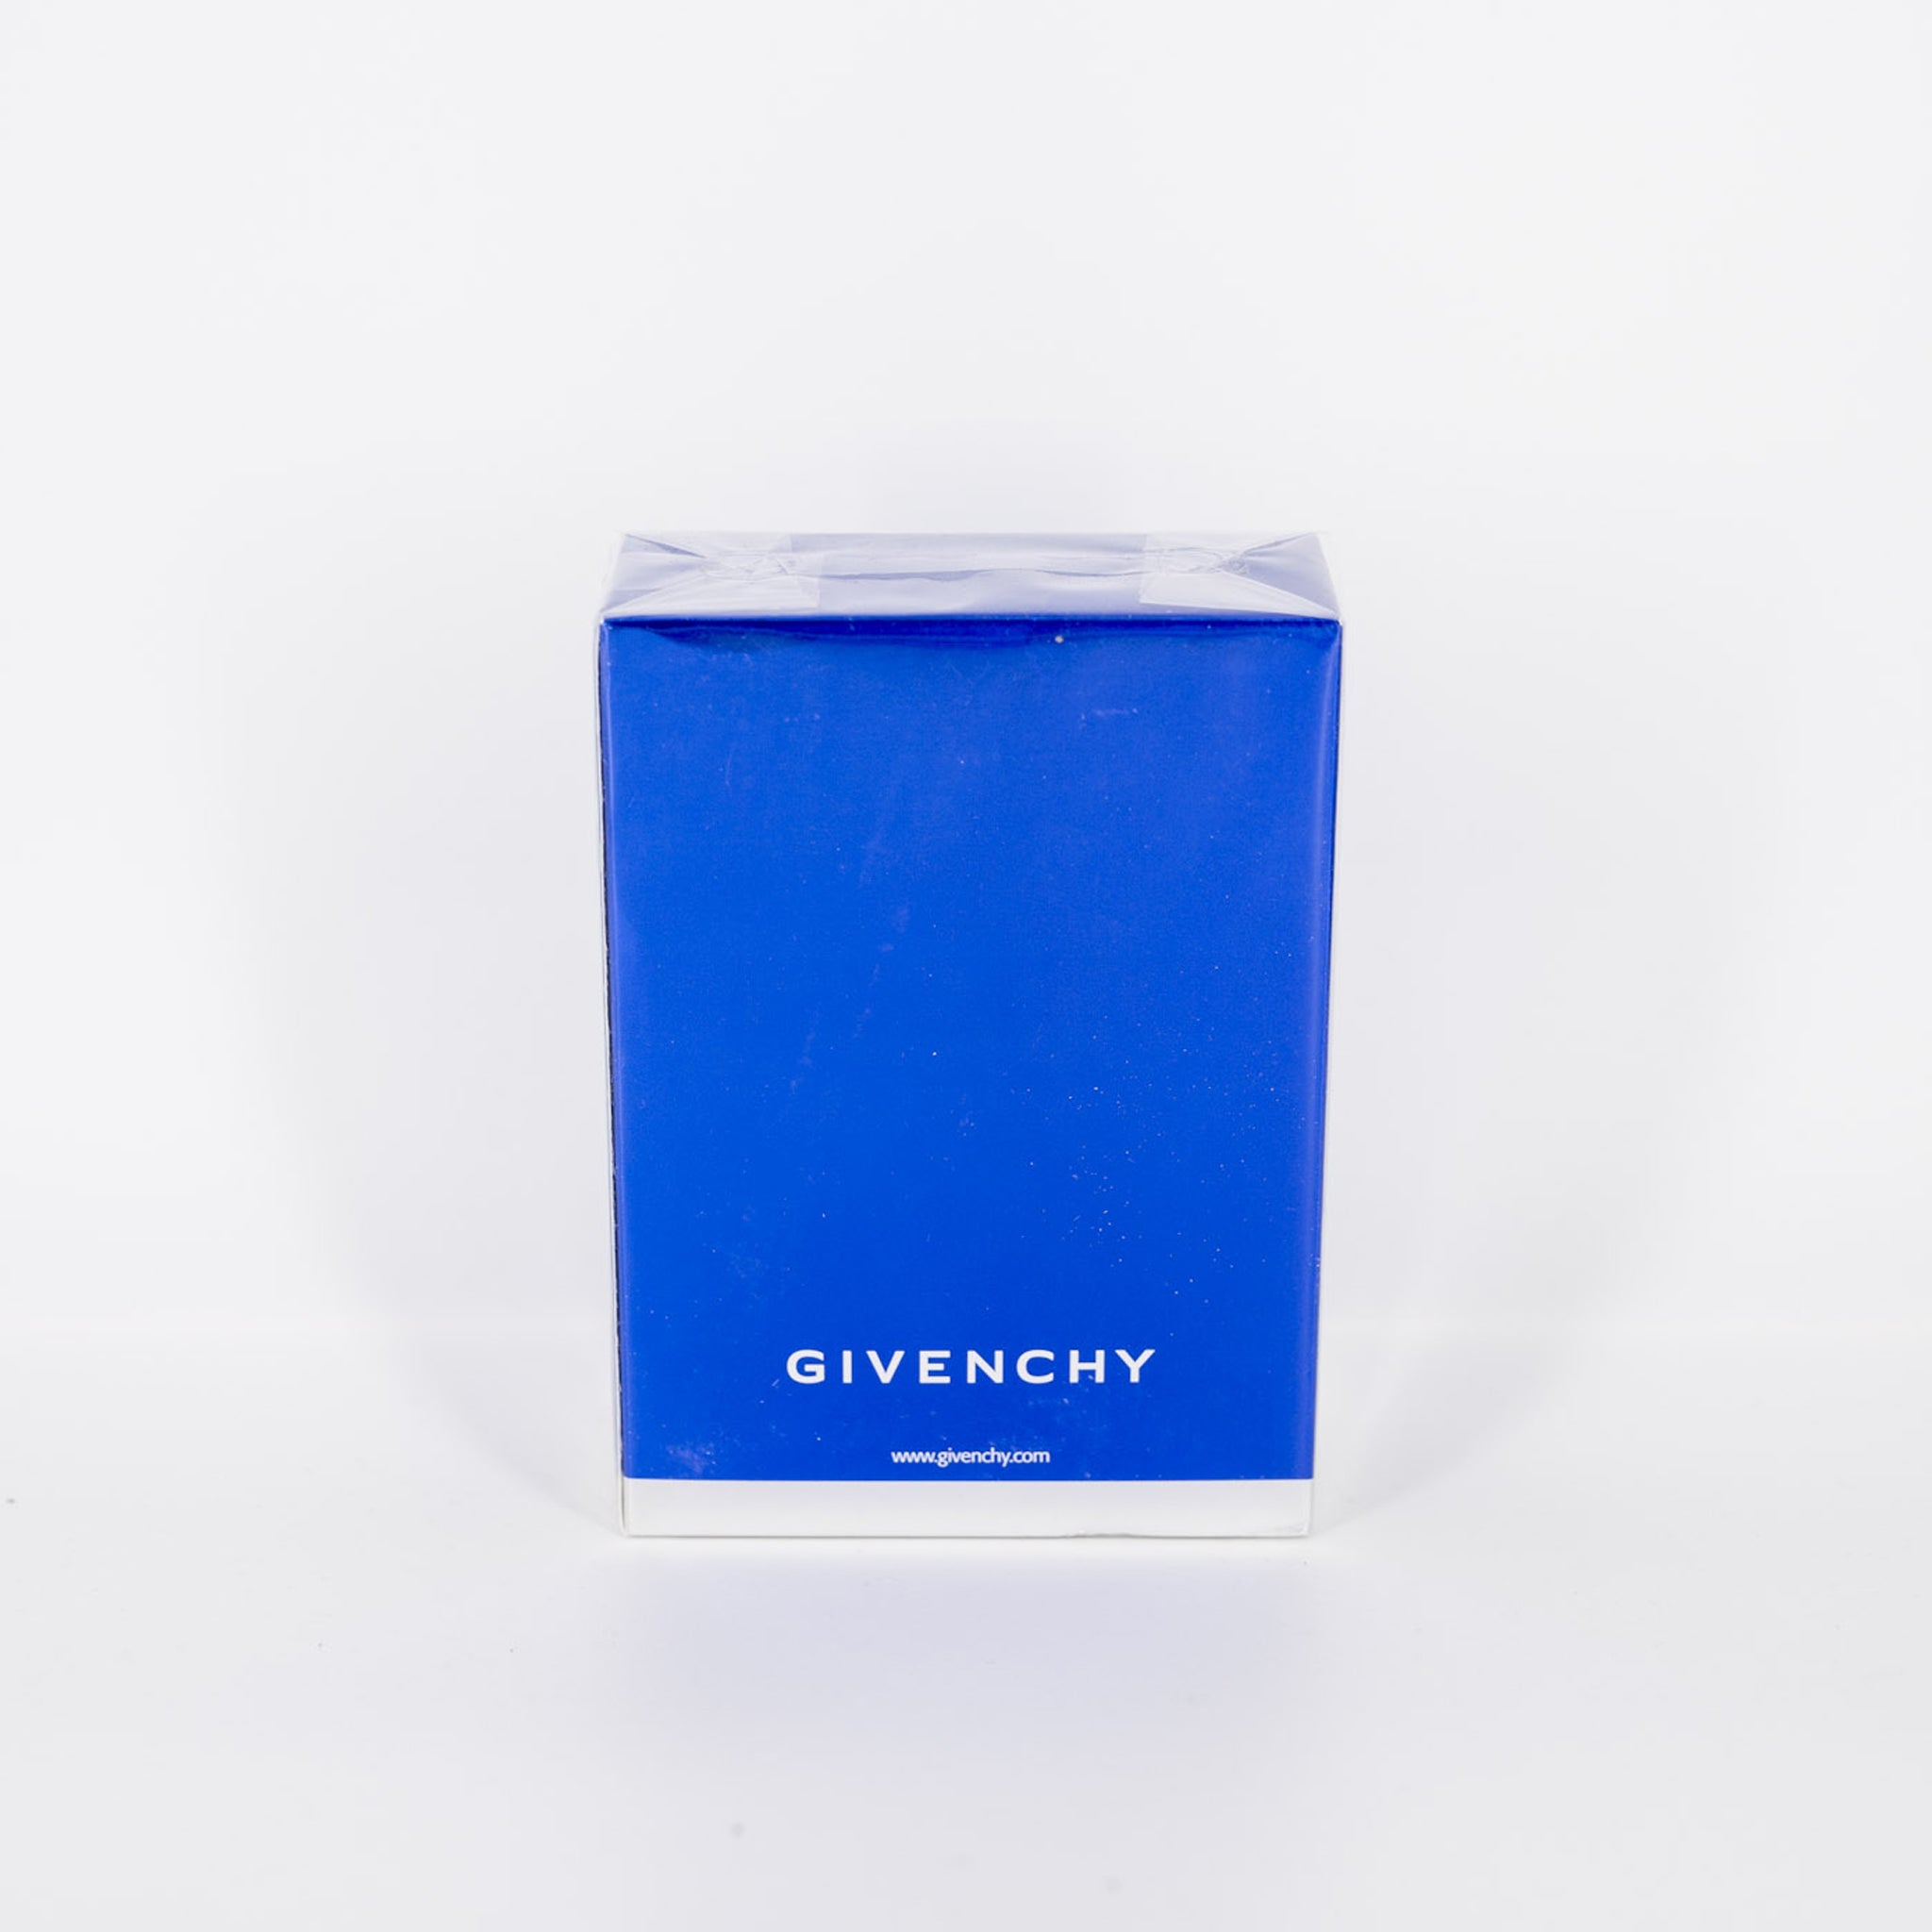 Very Irresistible Tropical Paradise by Givenchy